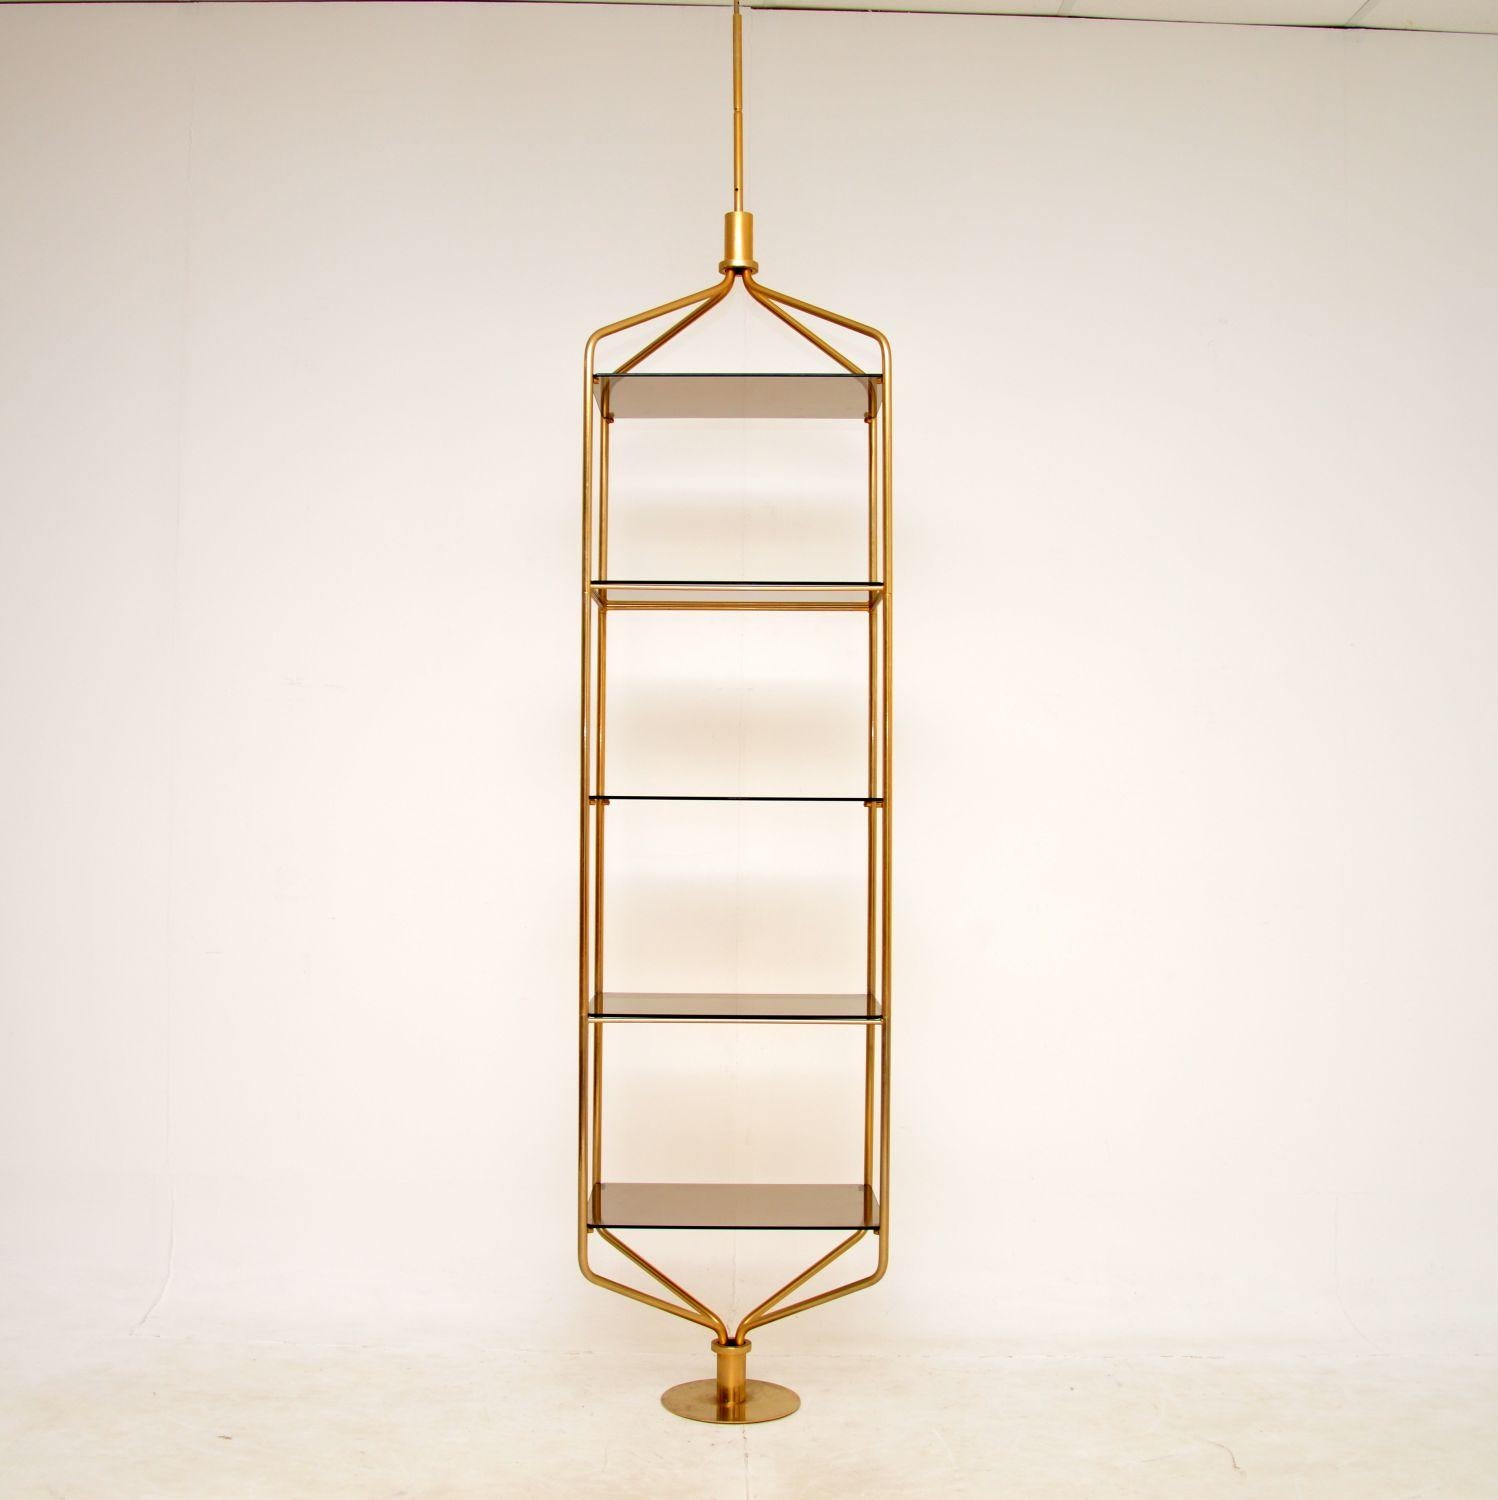 A stunning and very unusual vintage display cabinet in brass and glass. This was likely made in Italy, it dates from the 1970s.

It is beautifully designed, the frame sits on a circular base and has a sharp extension that raises vertically from